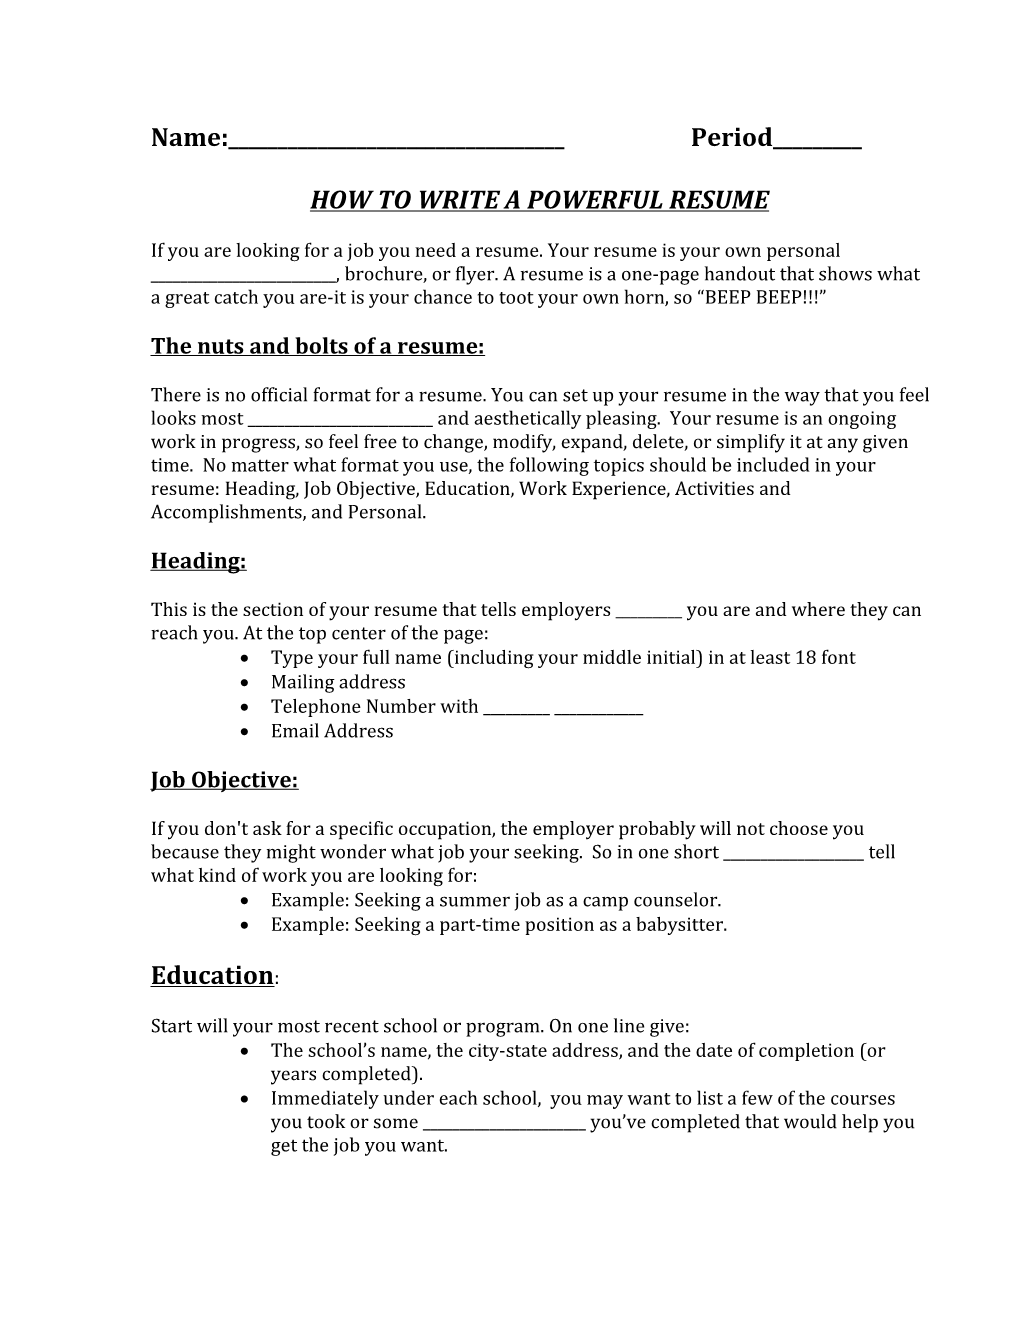 How to Write a Powerful Resume